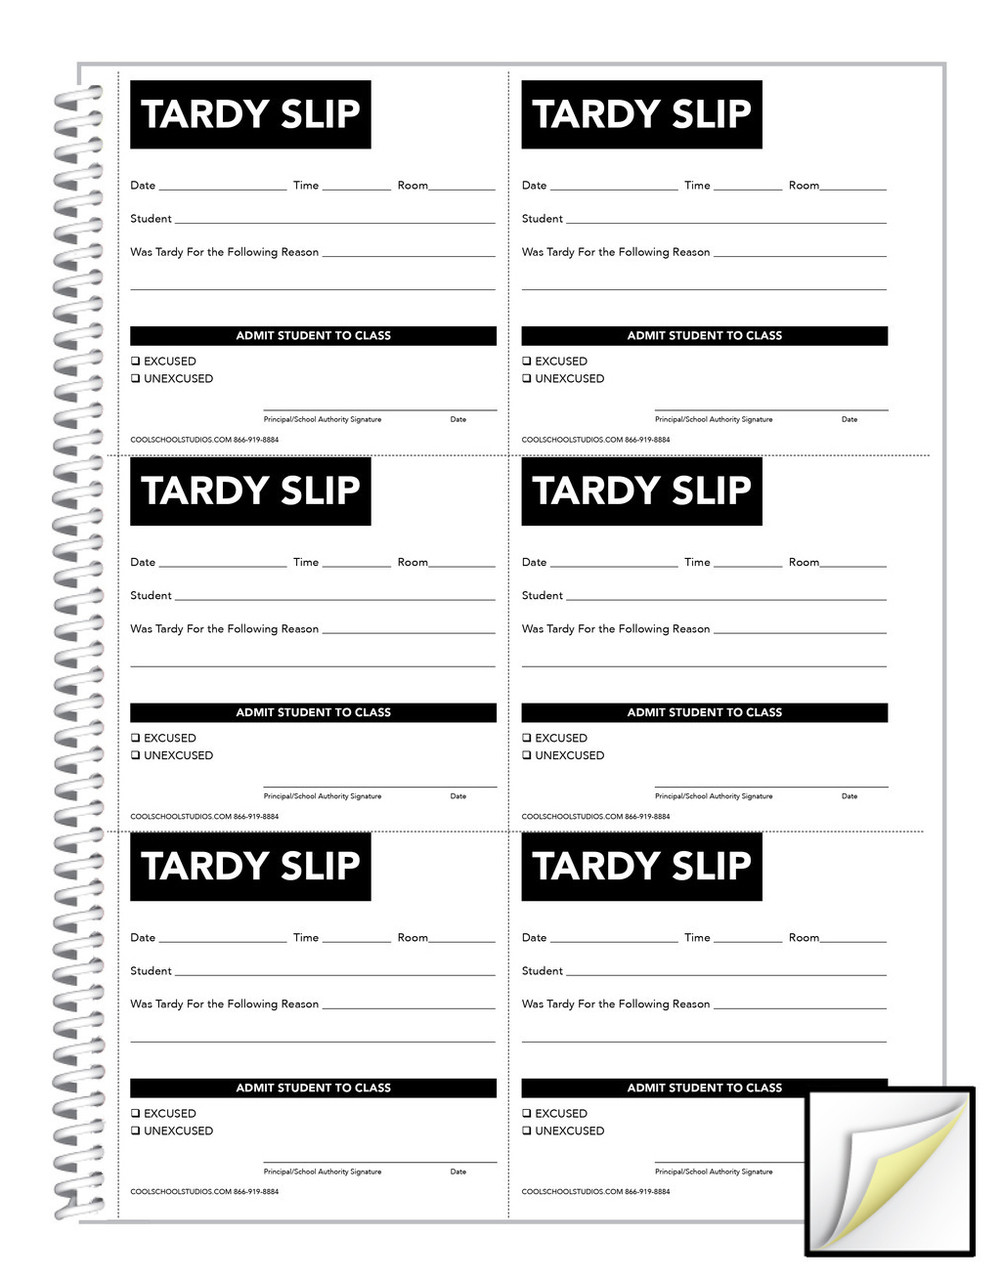 tardy-slip-book-2-part-carbonless-300-sets-each-book-cool-school